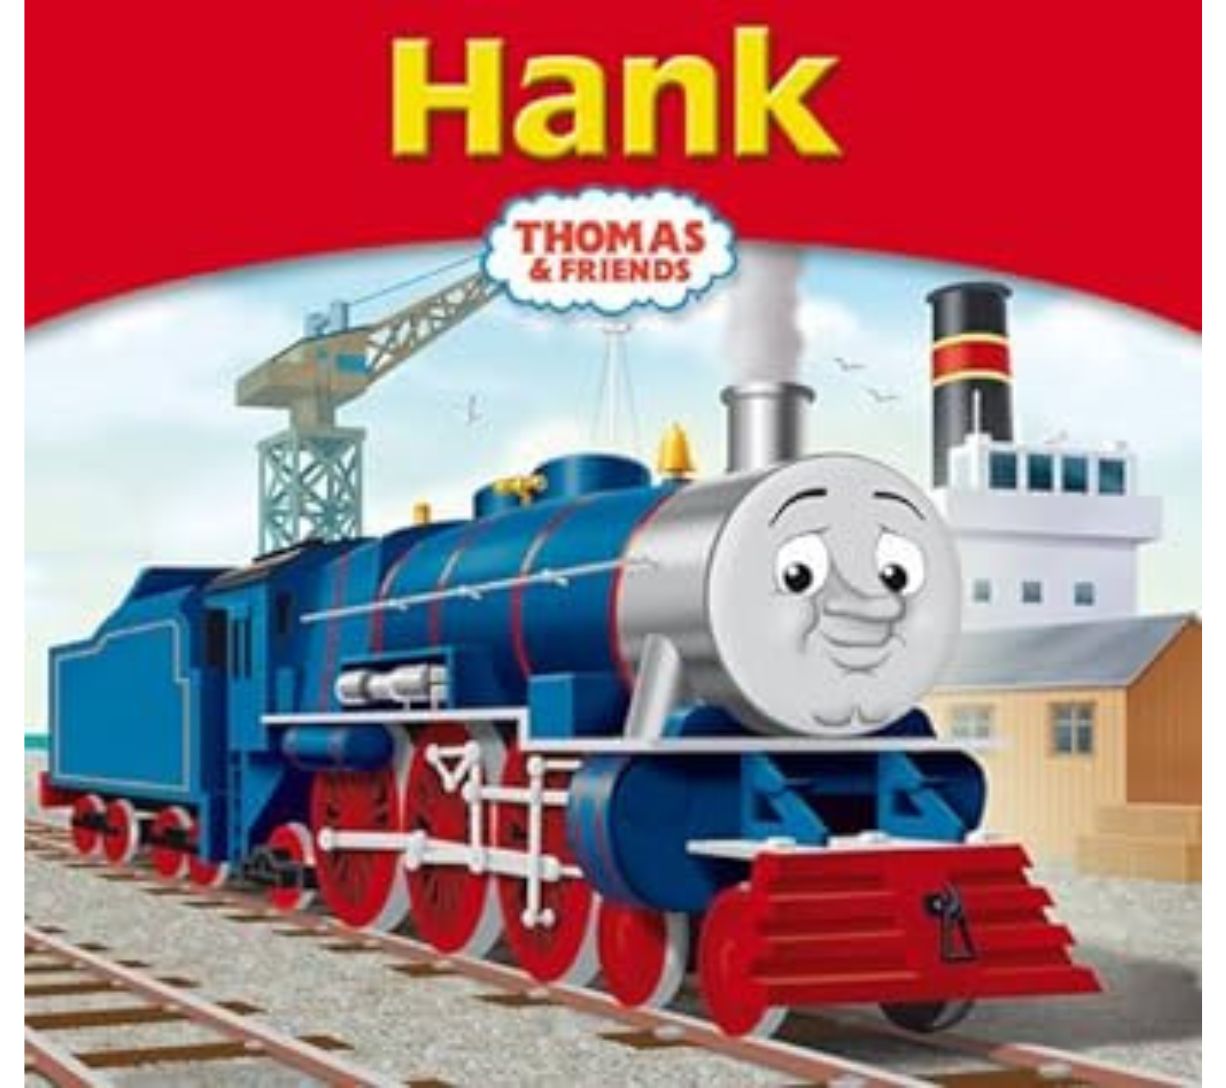 Thomas and Friends - Hank